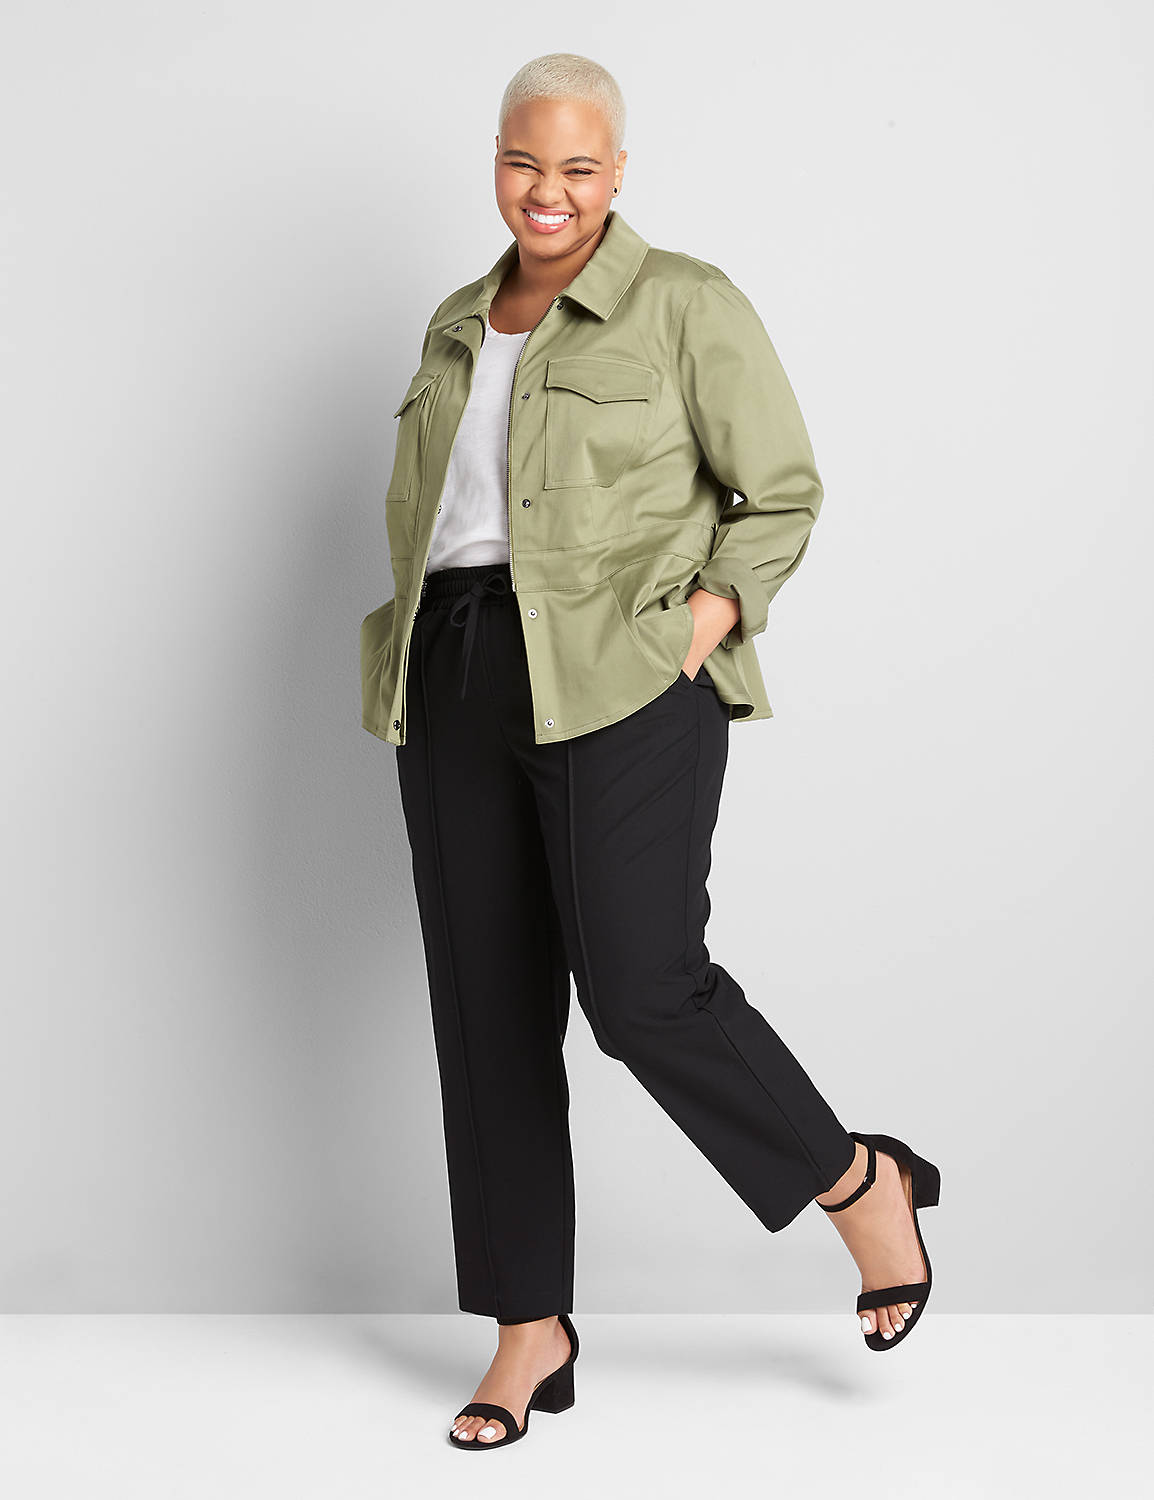 Perfect Drape Pull-On Relaxed Ankle Pant